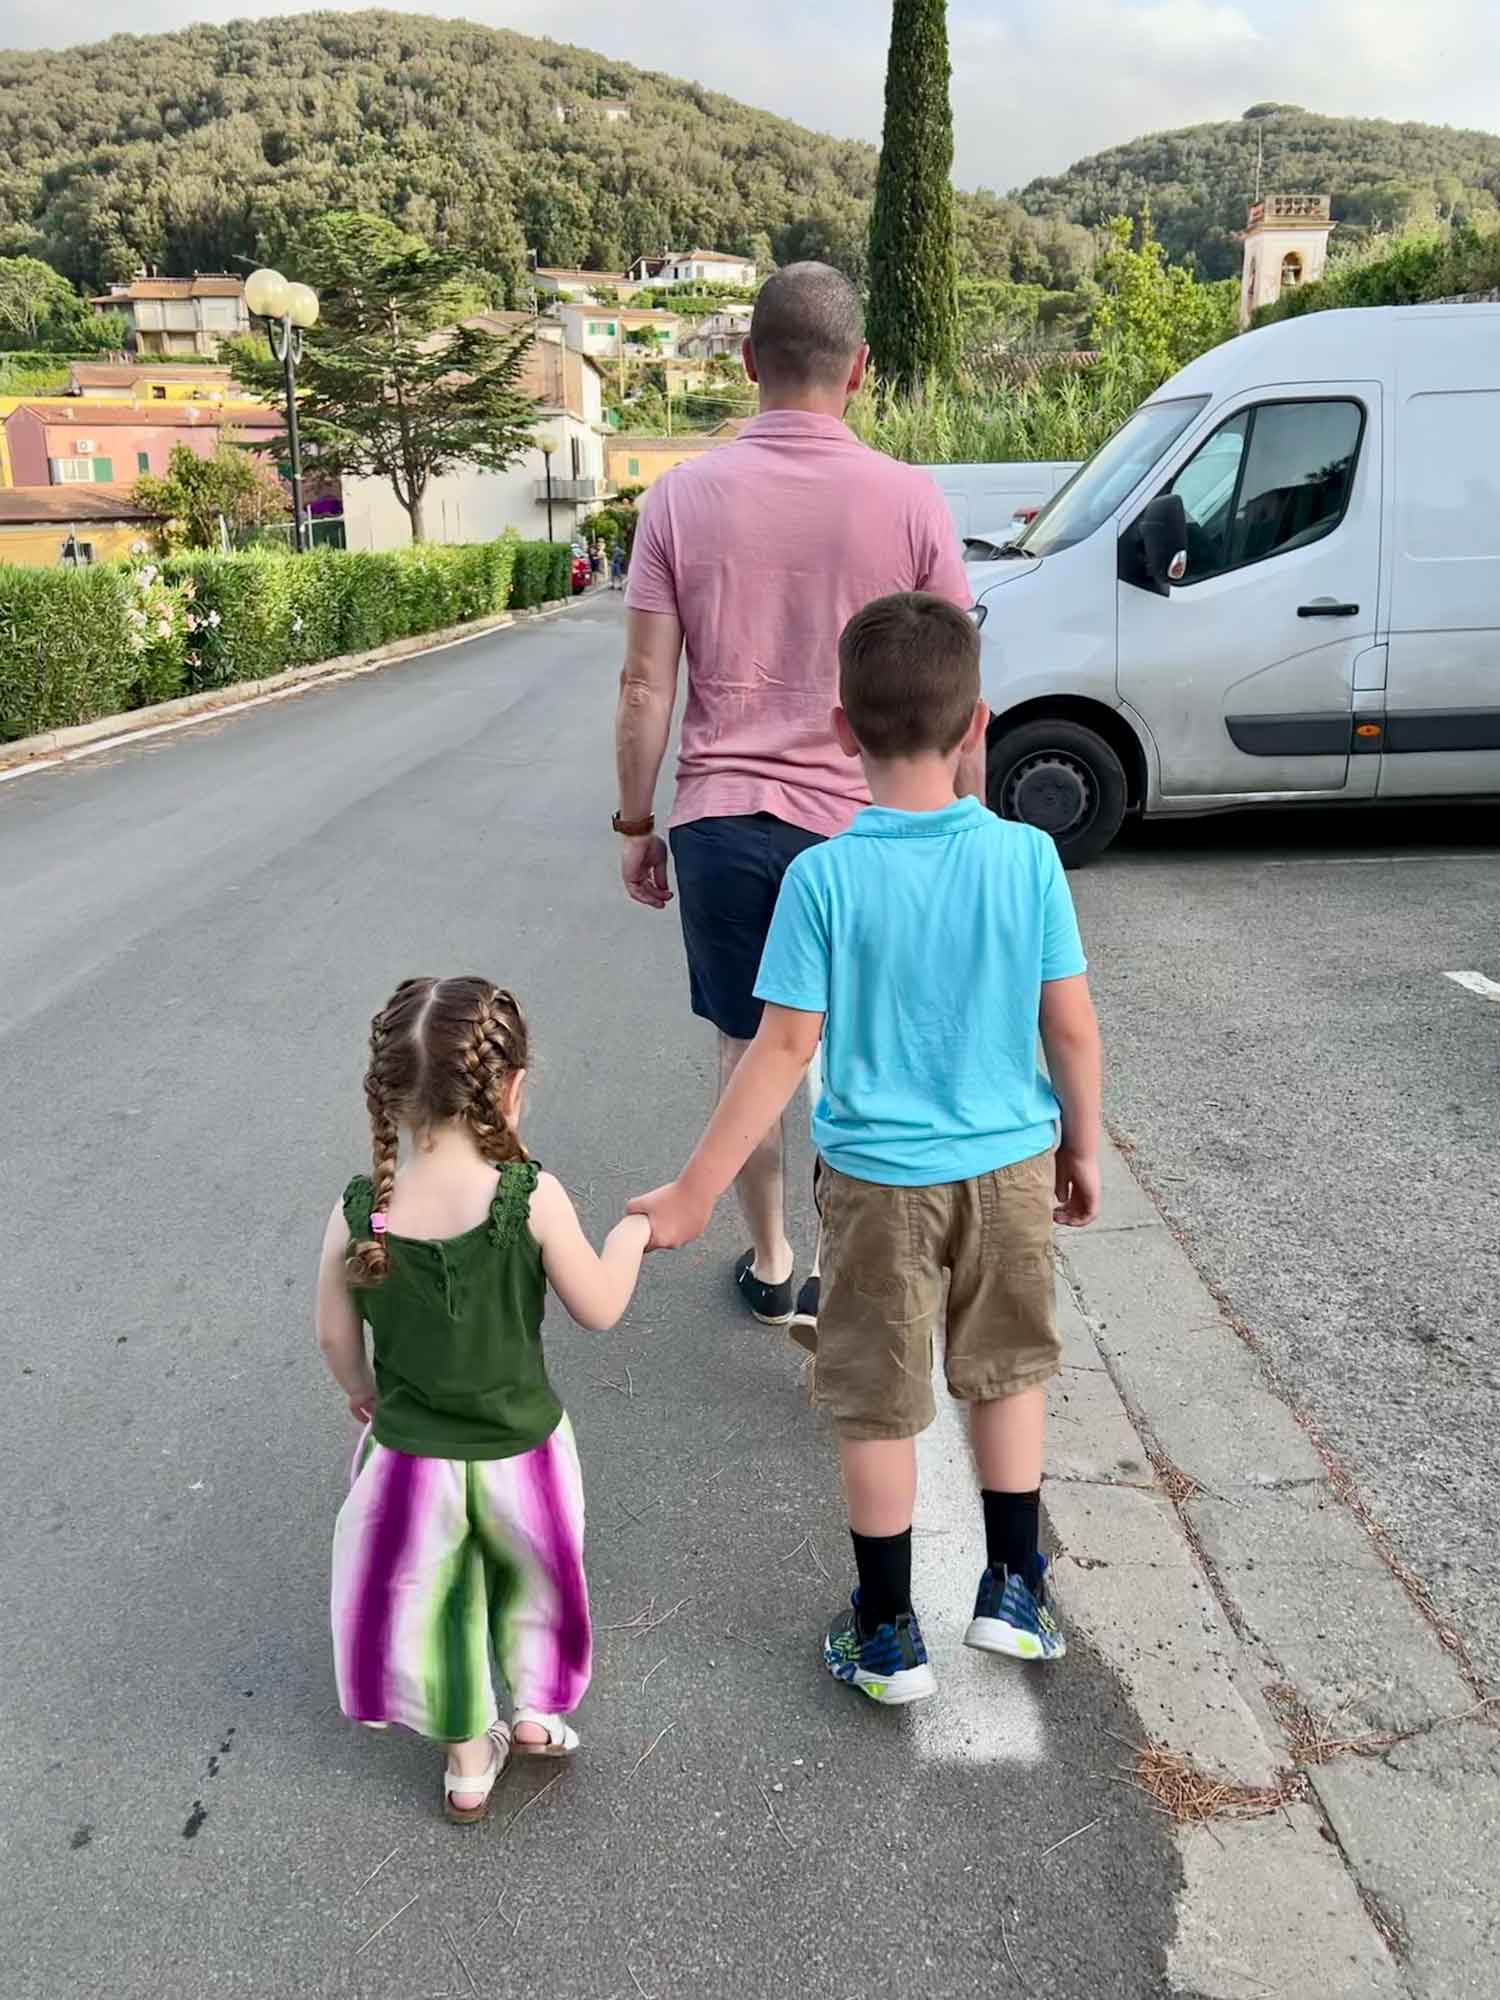 Dad leading two kids holding hands down a road